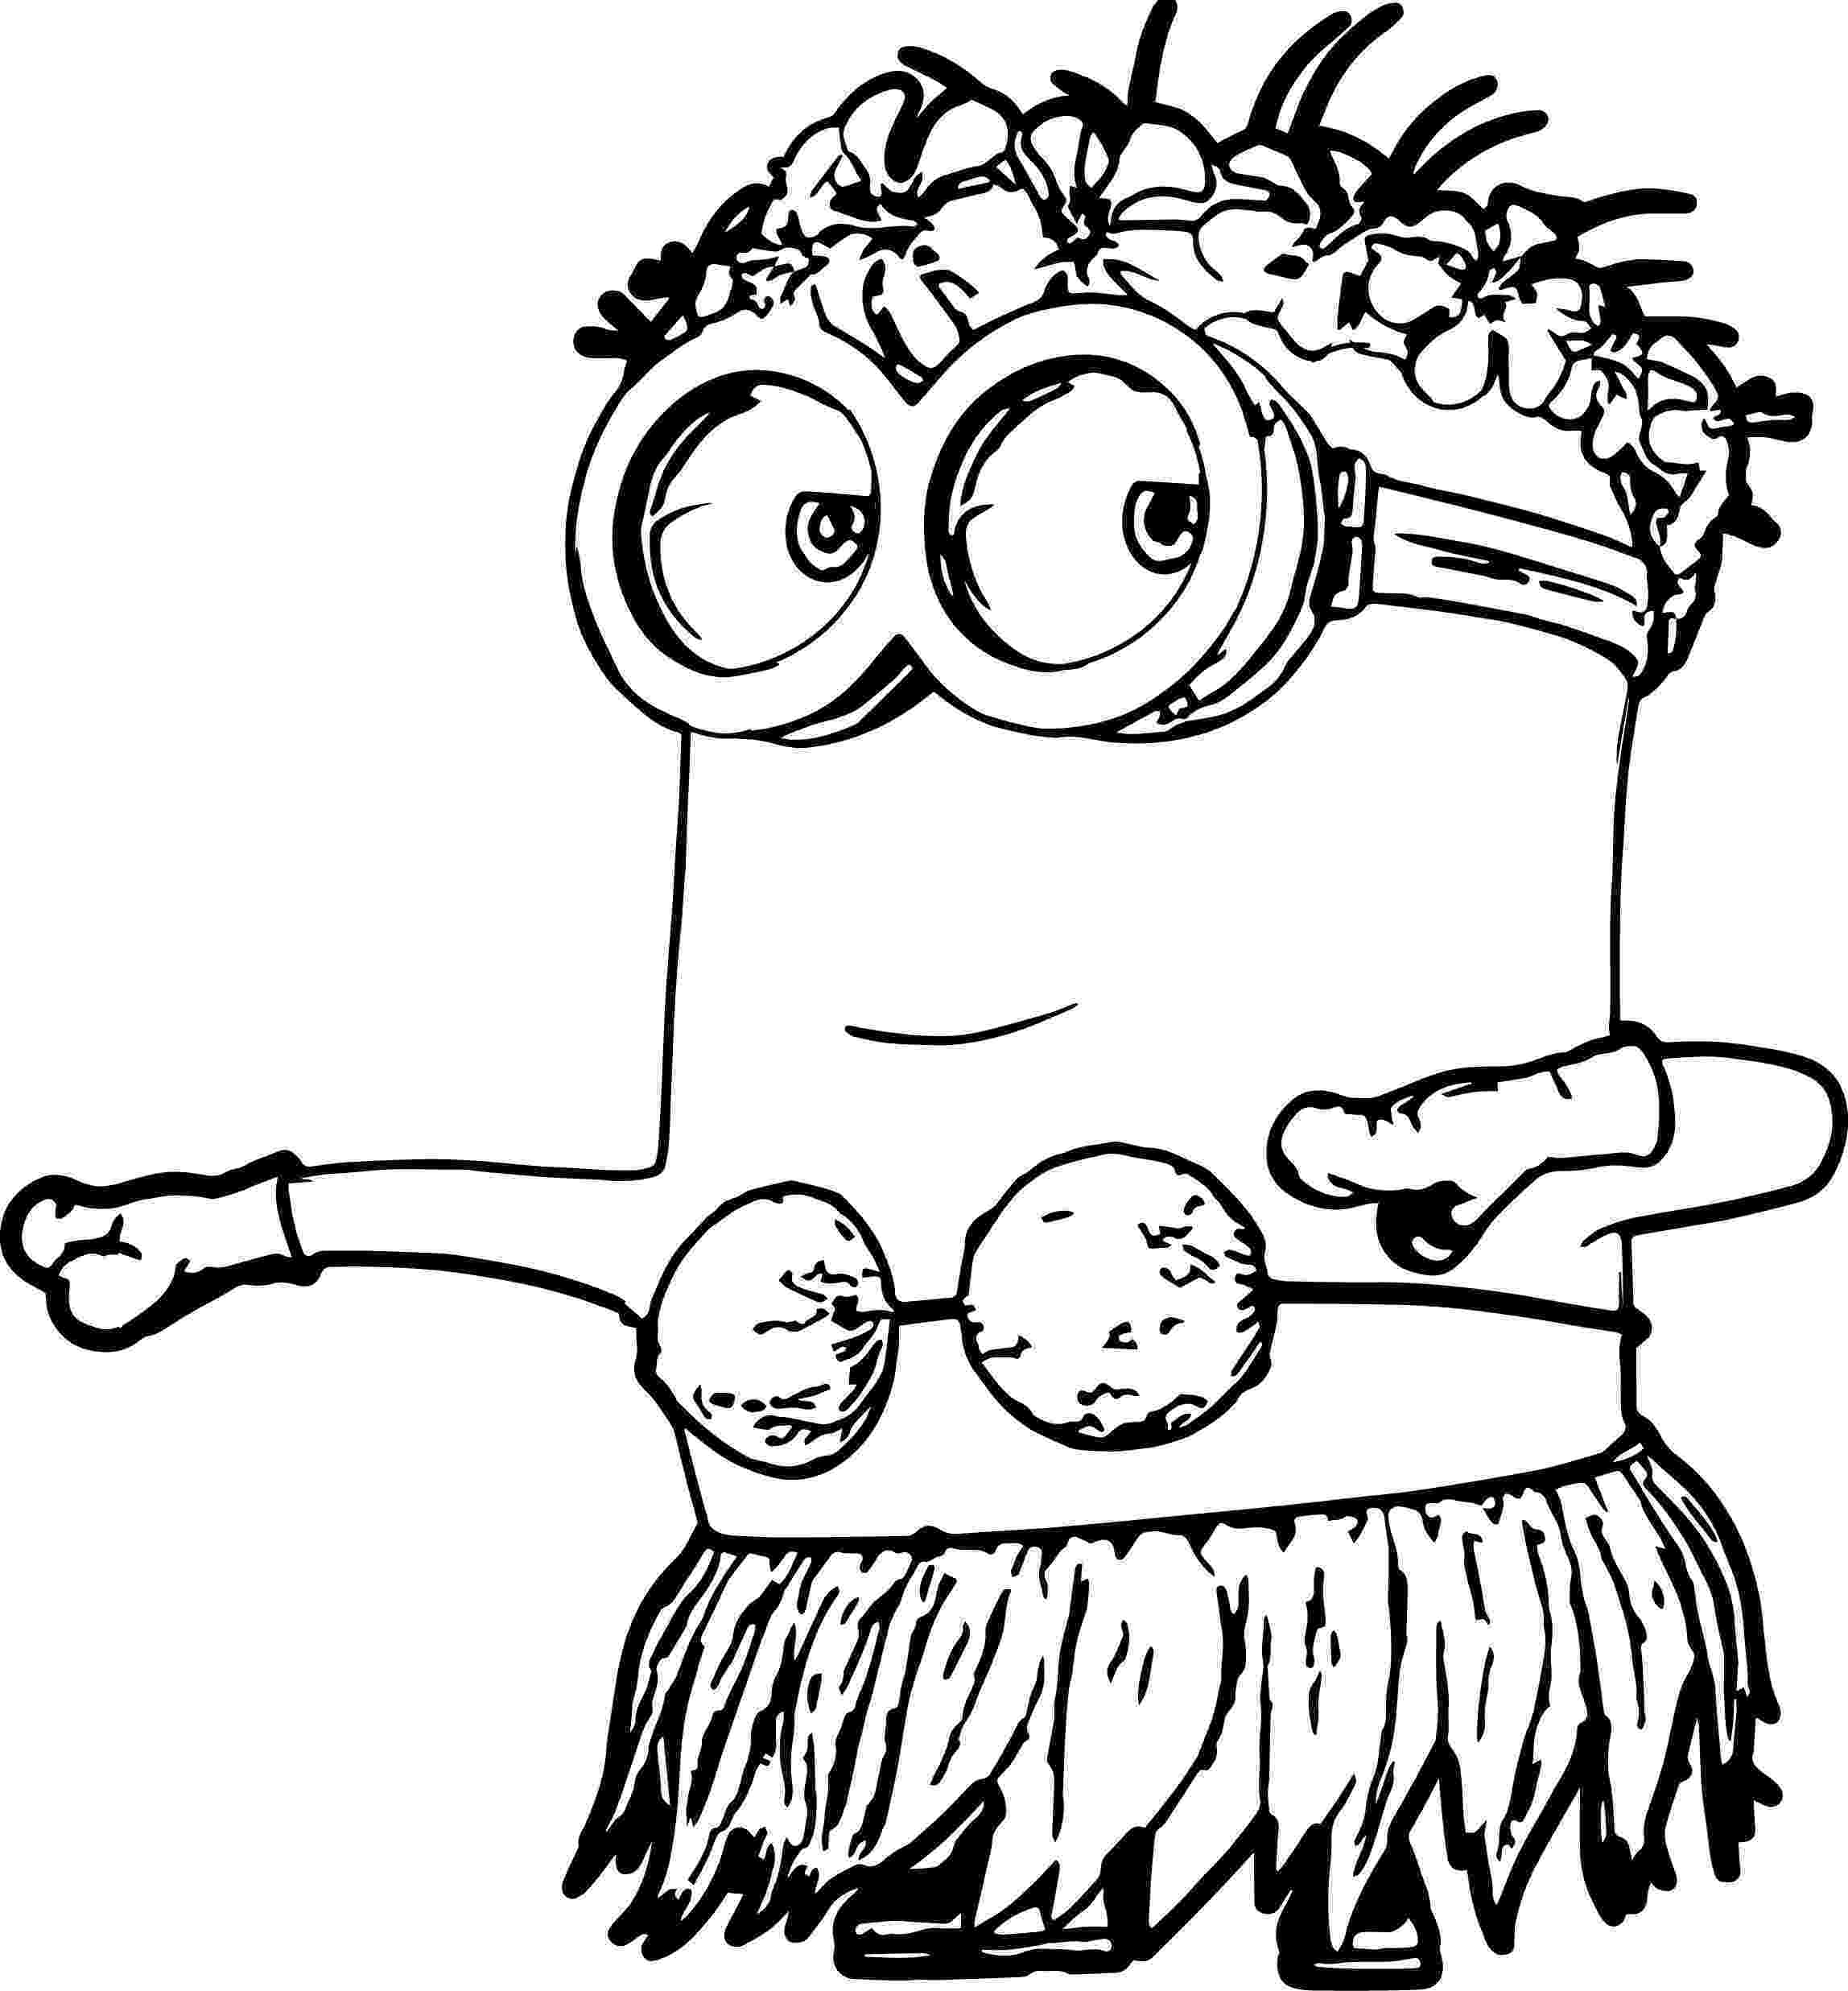 minions colouring pictures print download minion coloring pages for kids to have pictures colouring minions 